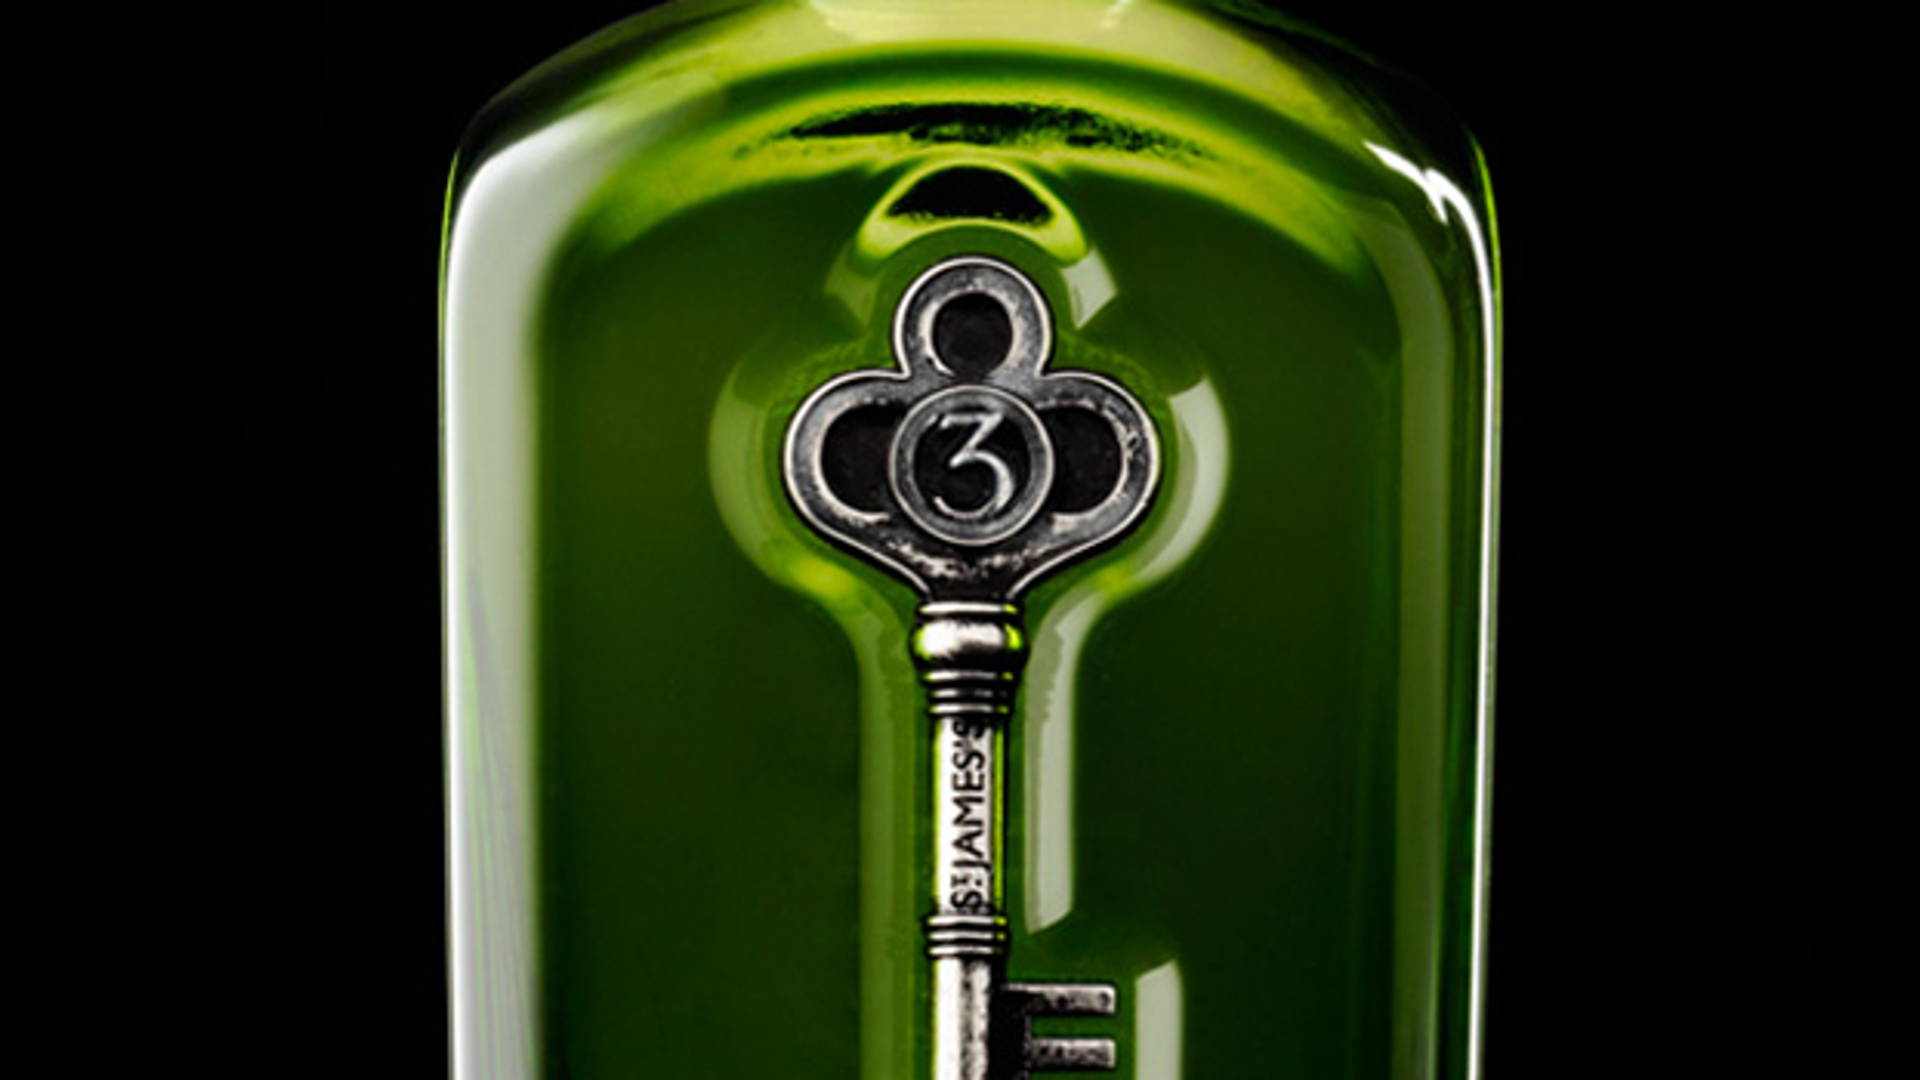 Featured image for No3 London Dry Gin